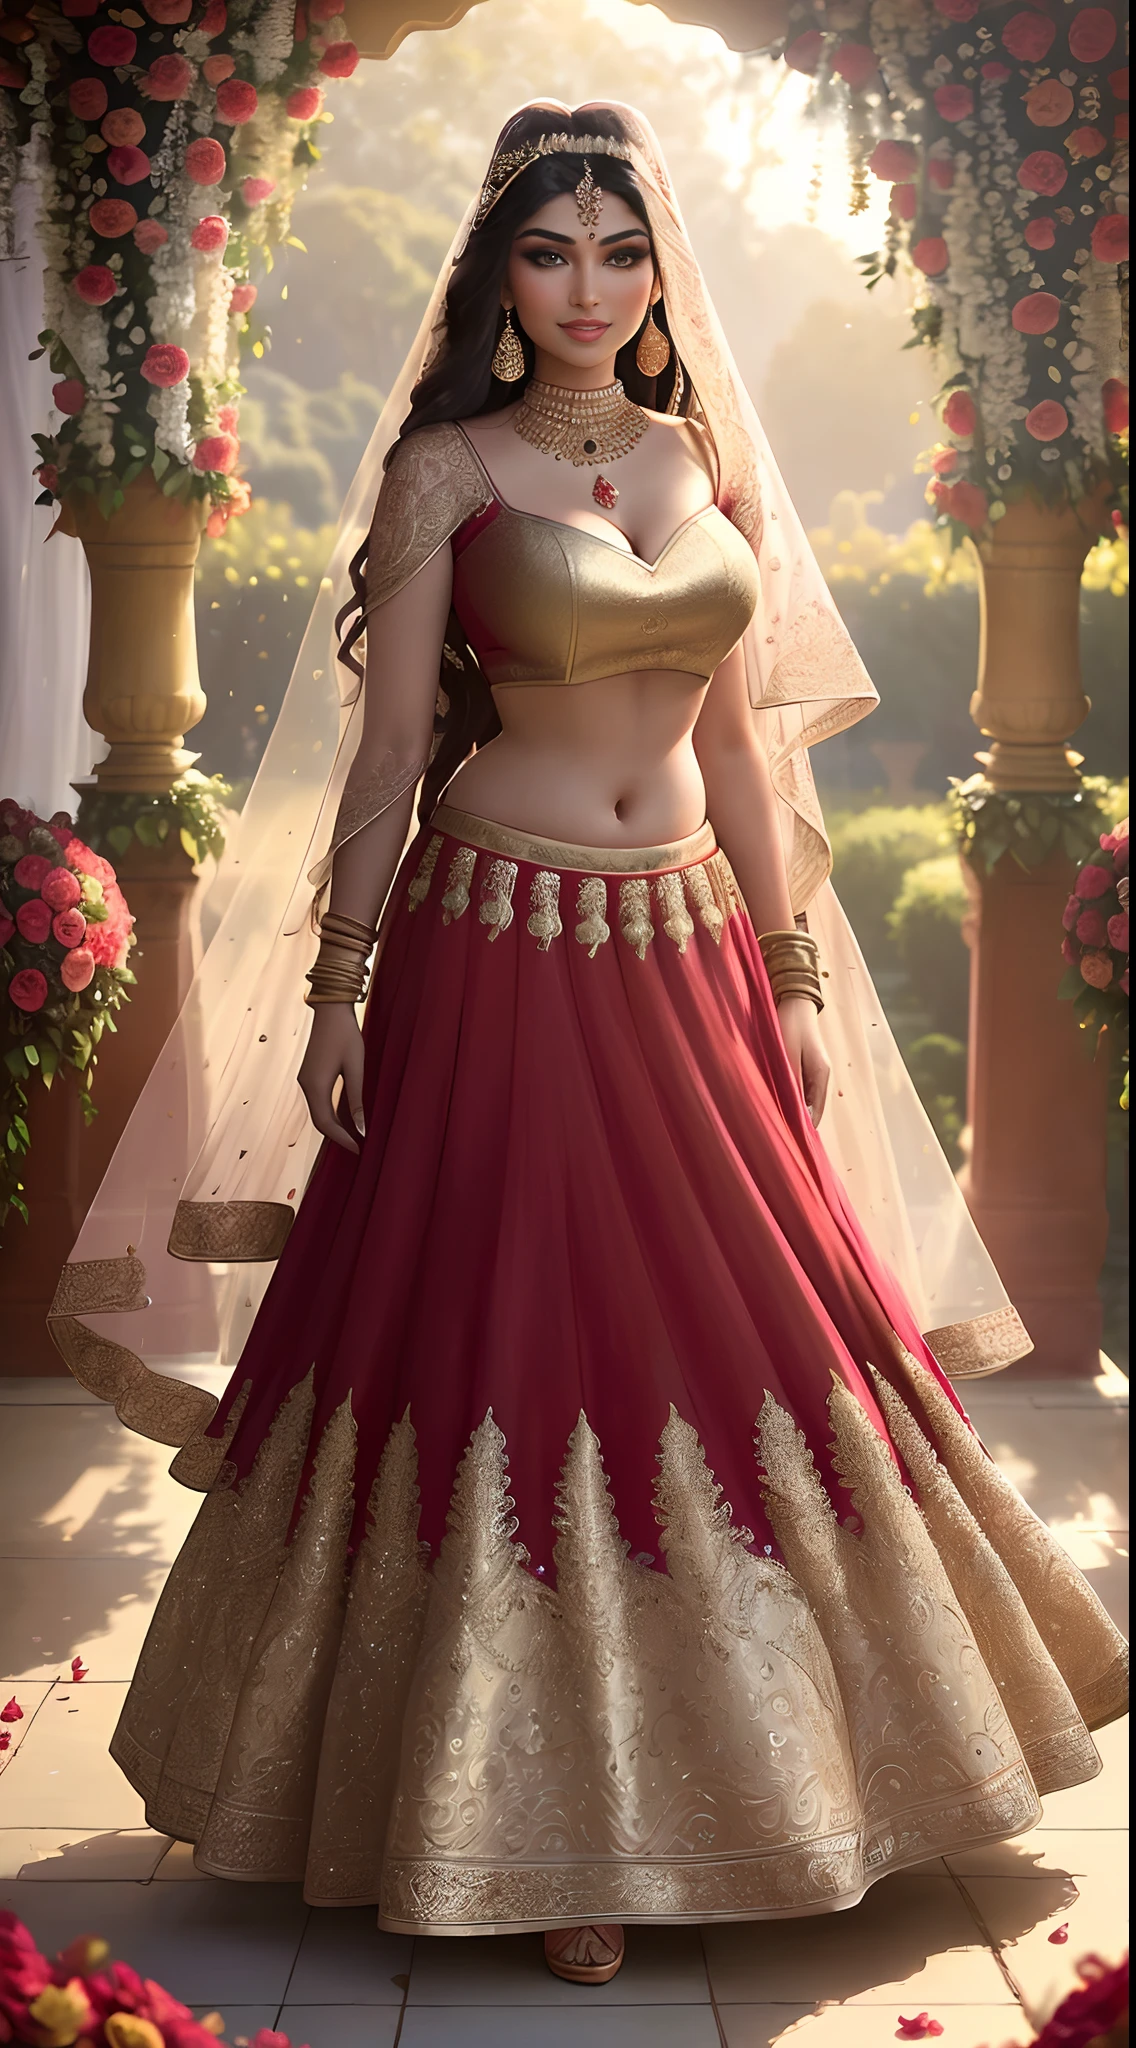 (masterpiece full length photography of a solo:1.2) alluring sexy tall curvy (18 yr old) Indian supermodel princess bride Ayesha Takia walking in (garden:1.3), (wearing stunning bridal red & gold lehenga & blouse:1.3). sheer dupatta, maximalism, (wedding flower decorations:1.3), (elegant cleavage & belly), (indian makeup & jewelry:1.2) long braided brown hair with highlights,, vivacious, lustful glance, exhilarated (beautiful detailed eyes:1.1) , (flirty bright smile:1.2), (intense dramatic afternoon light:1.4), backlit, key light, rim light, light rays, highly detailed, trending on artstation, paint splashes, rich color, abstract portrait, by Atey Ghailan